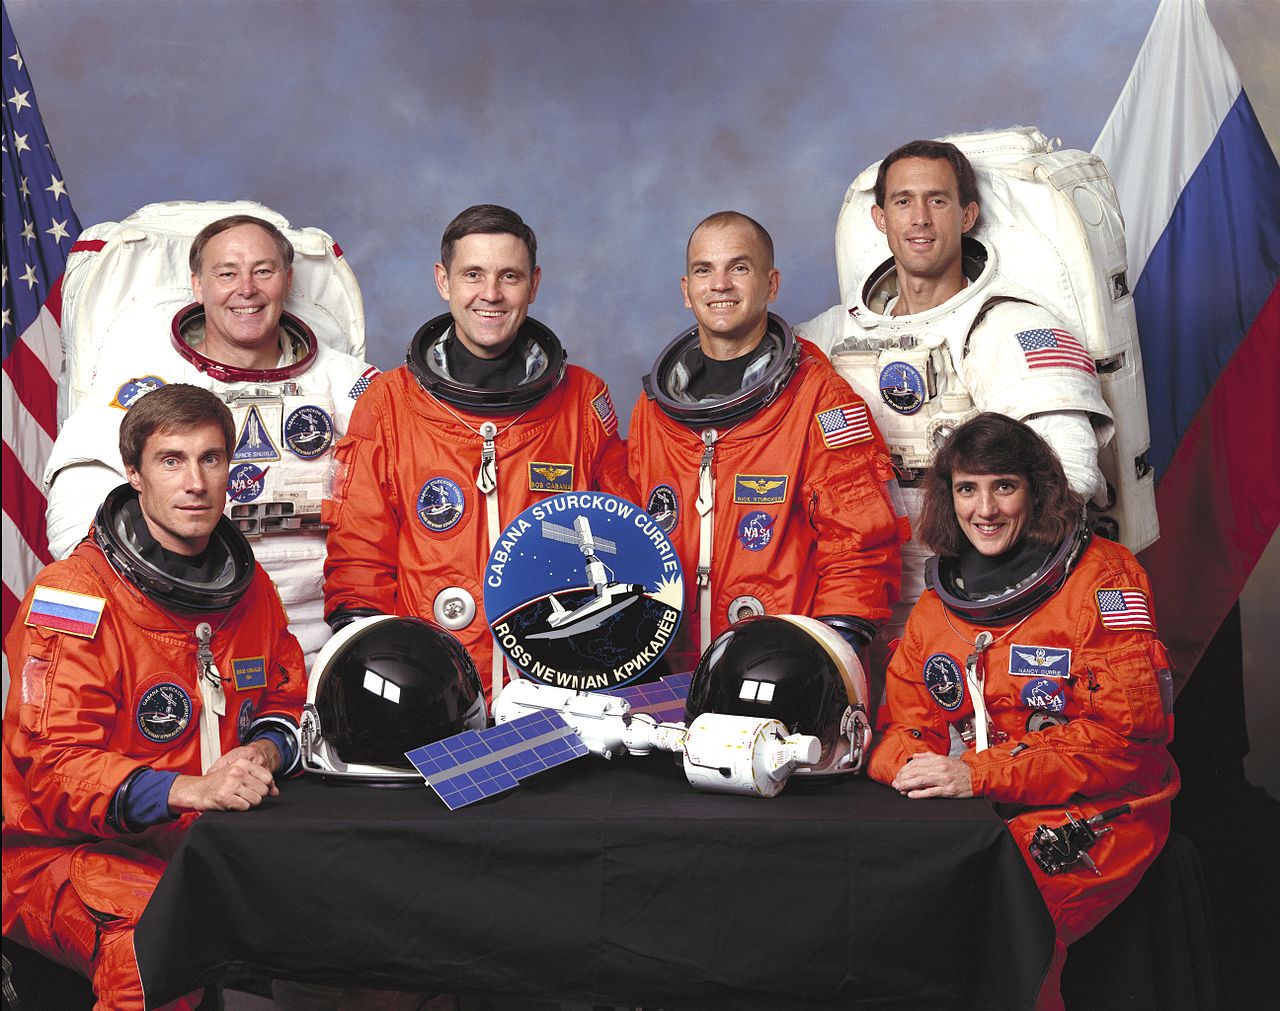 Left to right: Sergei K. krikalev (seated), Jerry L. Ross, Rober D. Cabana, Frederick W. Sturckow, James H. Newman and Nancy J. Currie (seated). (NASA)